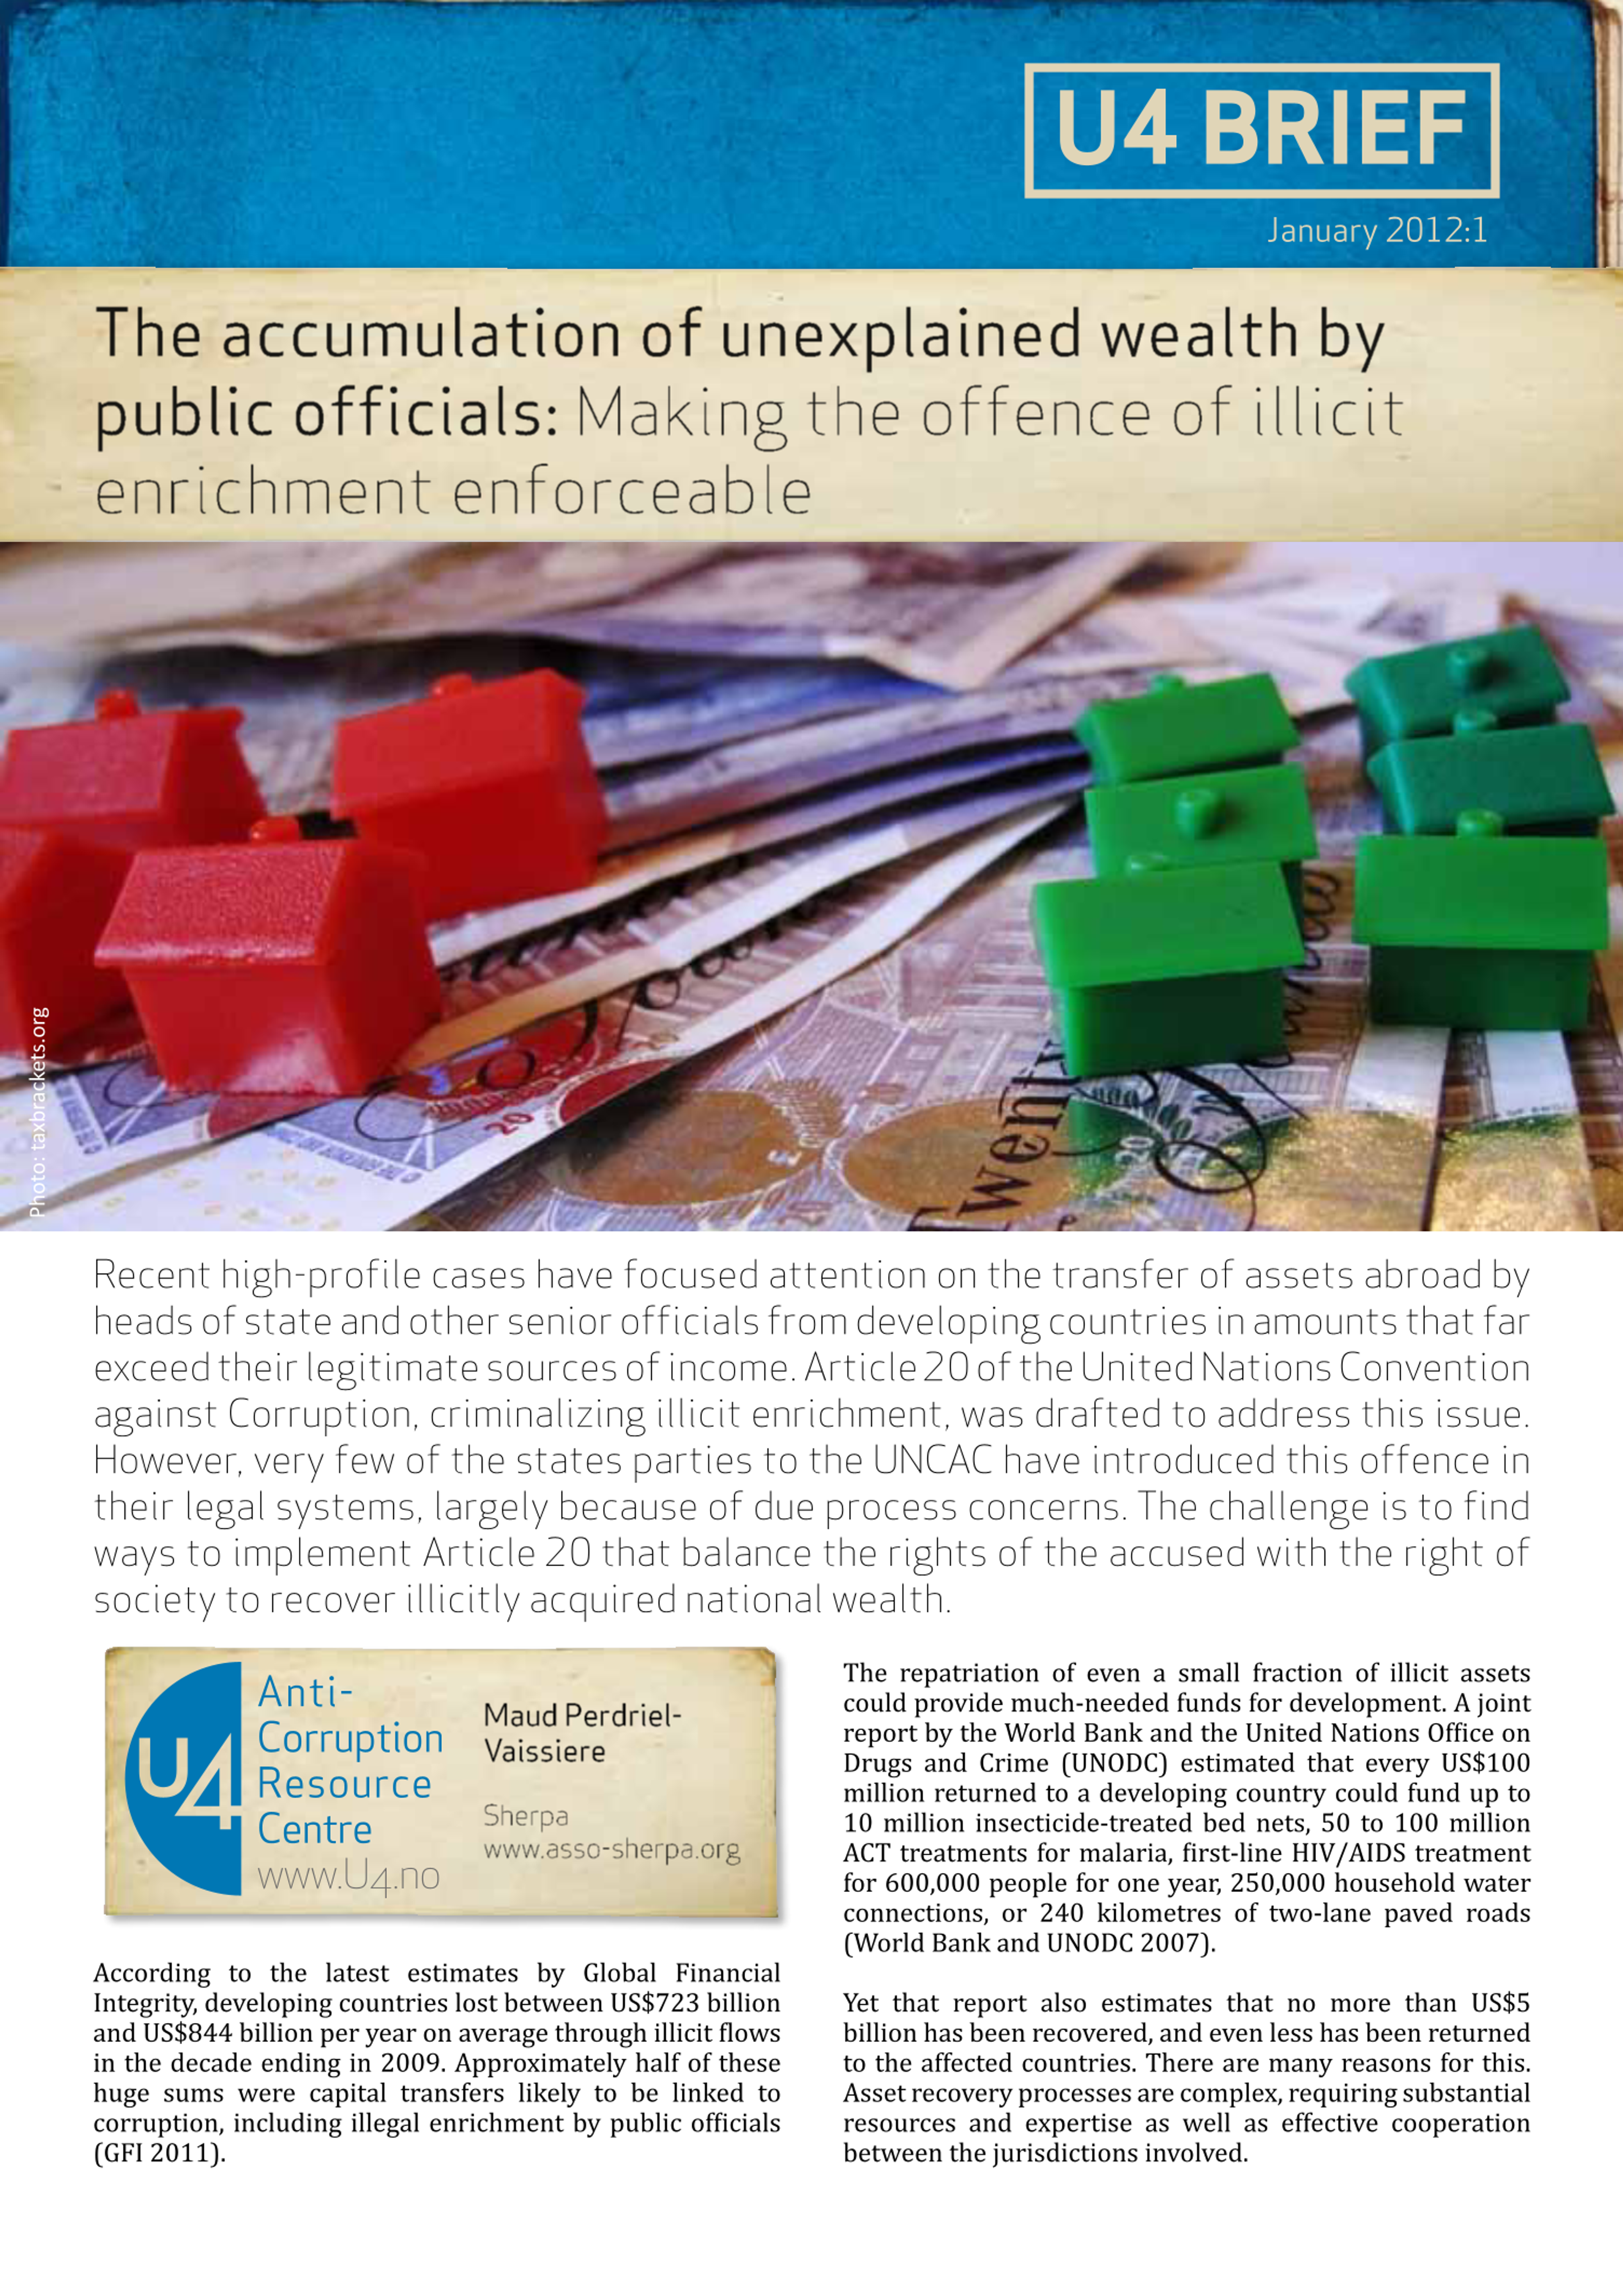 The accumulation of unexplained wealth by public officials: Making the offence of illicit enrichment enforceable